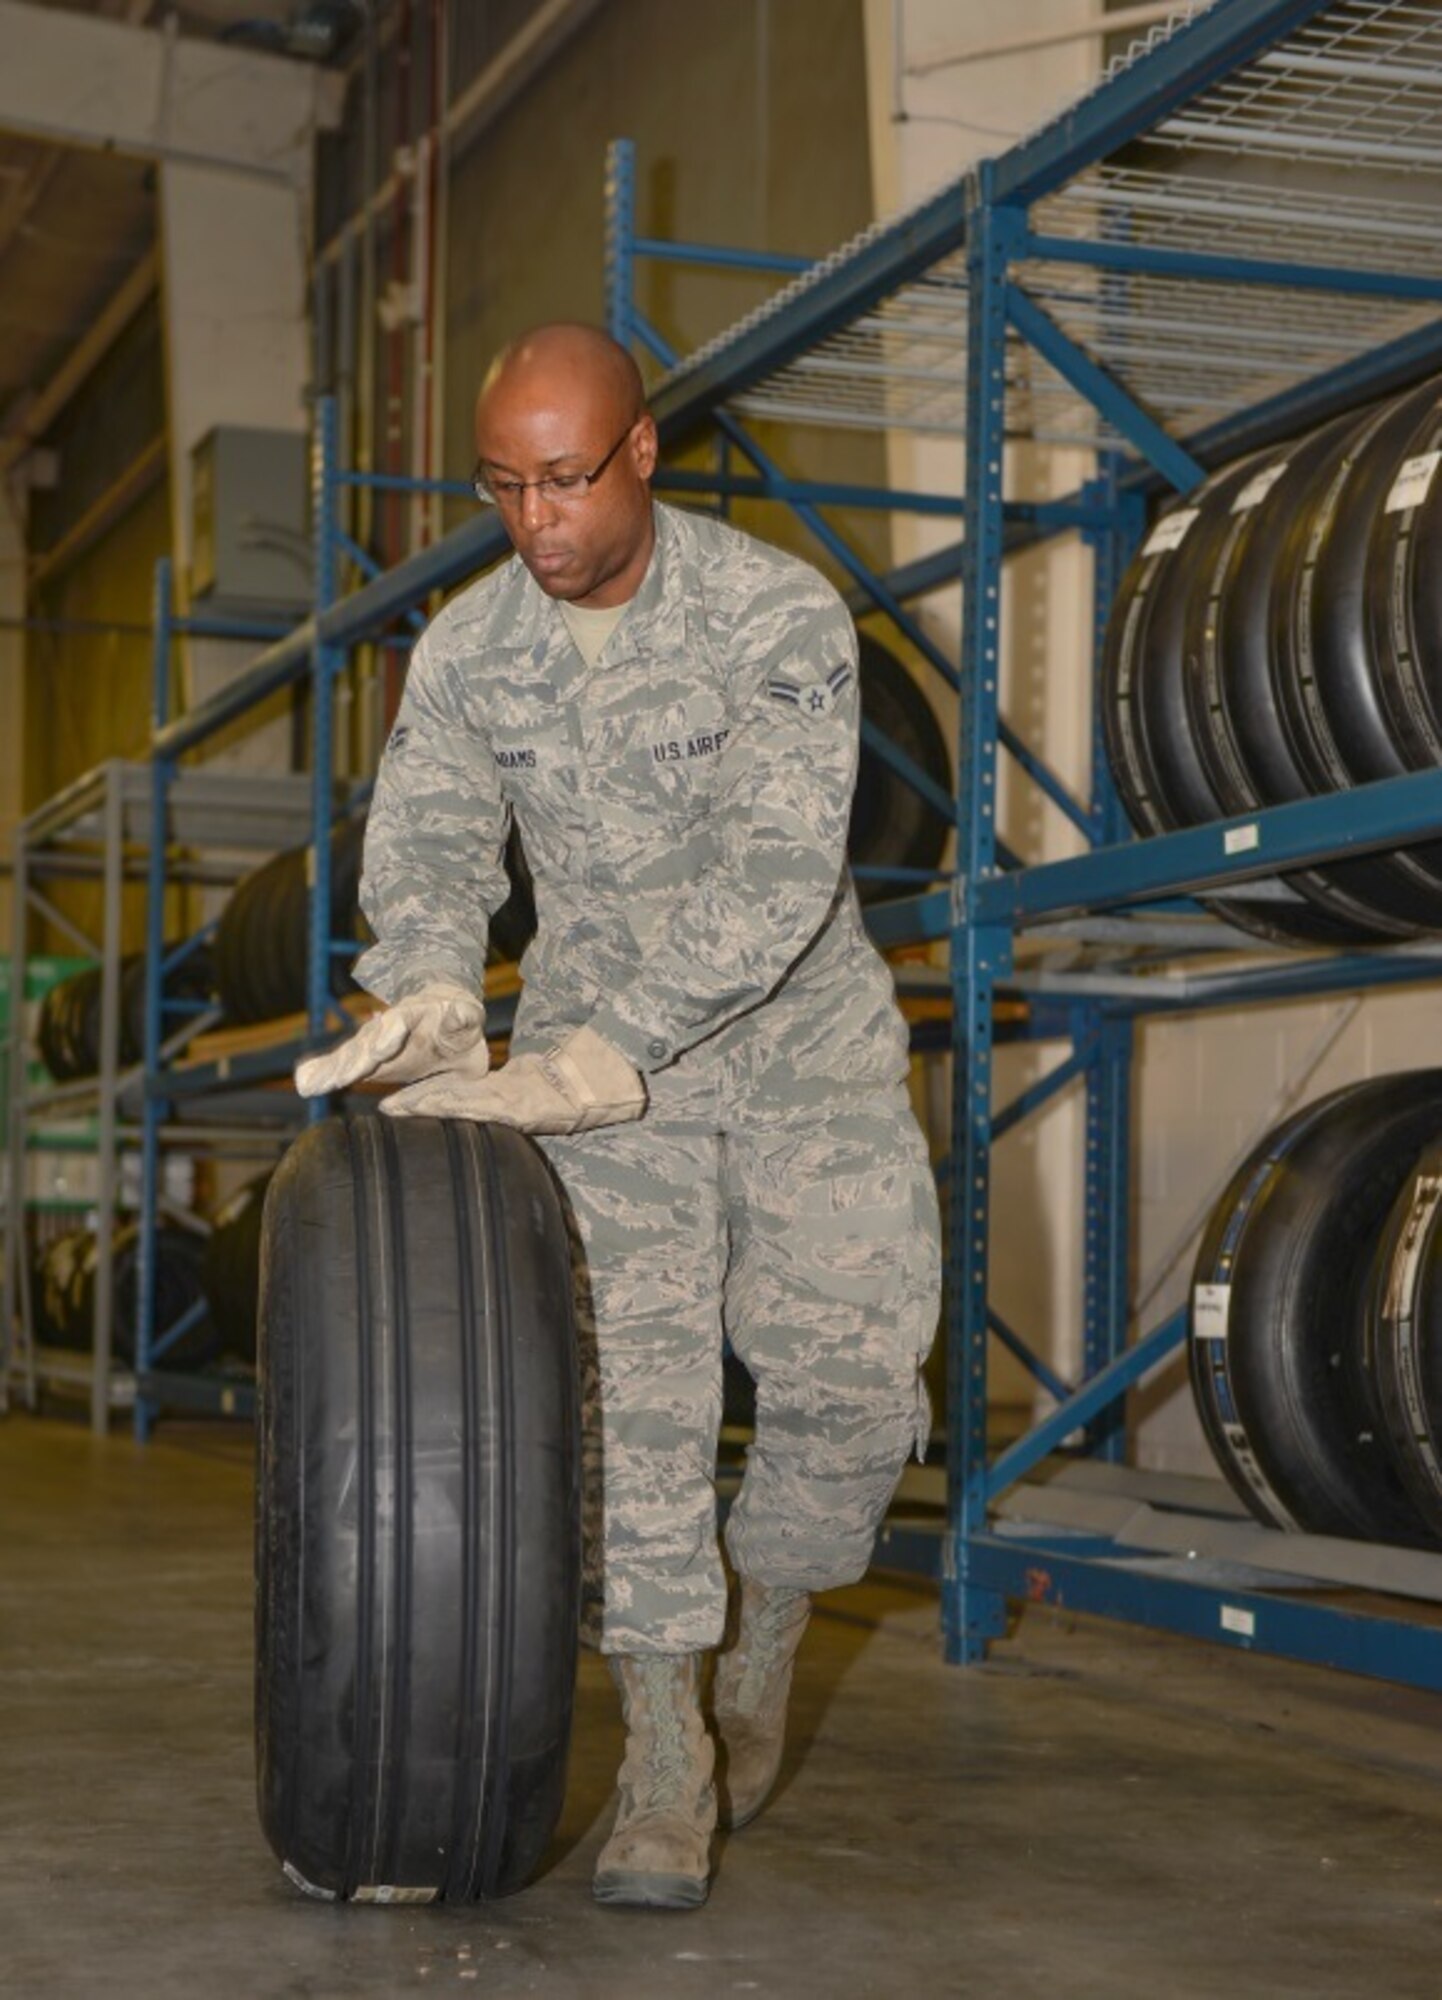 Airmen 1st Class Kristopher Adams, 96th Logistics Readiness Squadron F-35 supply apprentice, prepares a tire for delivery at Eglin Air Force Base, Fla., Oct. 15, 2015. Materiel management Airmen handle aircraft parts to maintain the F-35 Lightning II aircraft here. (U.S. Air Force Photo/Senior Airman Andrea Posey)